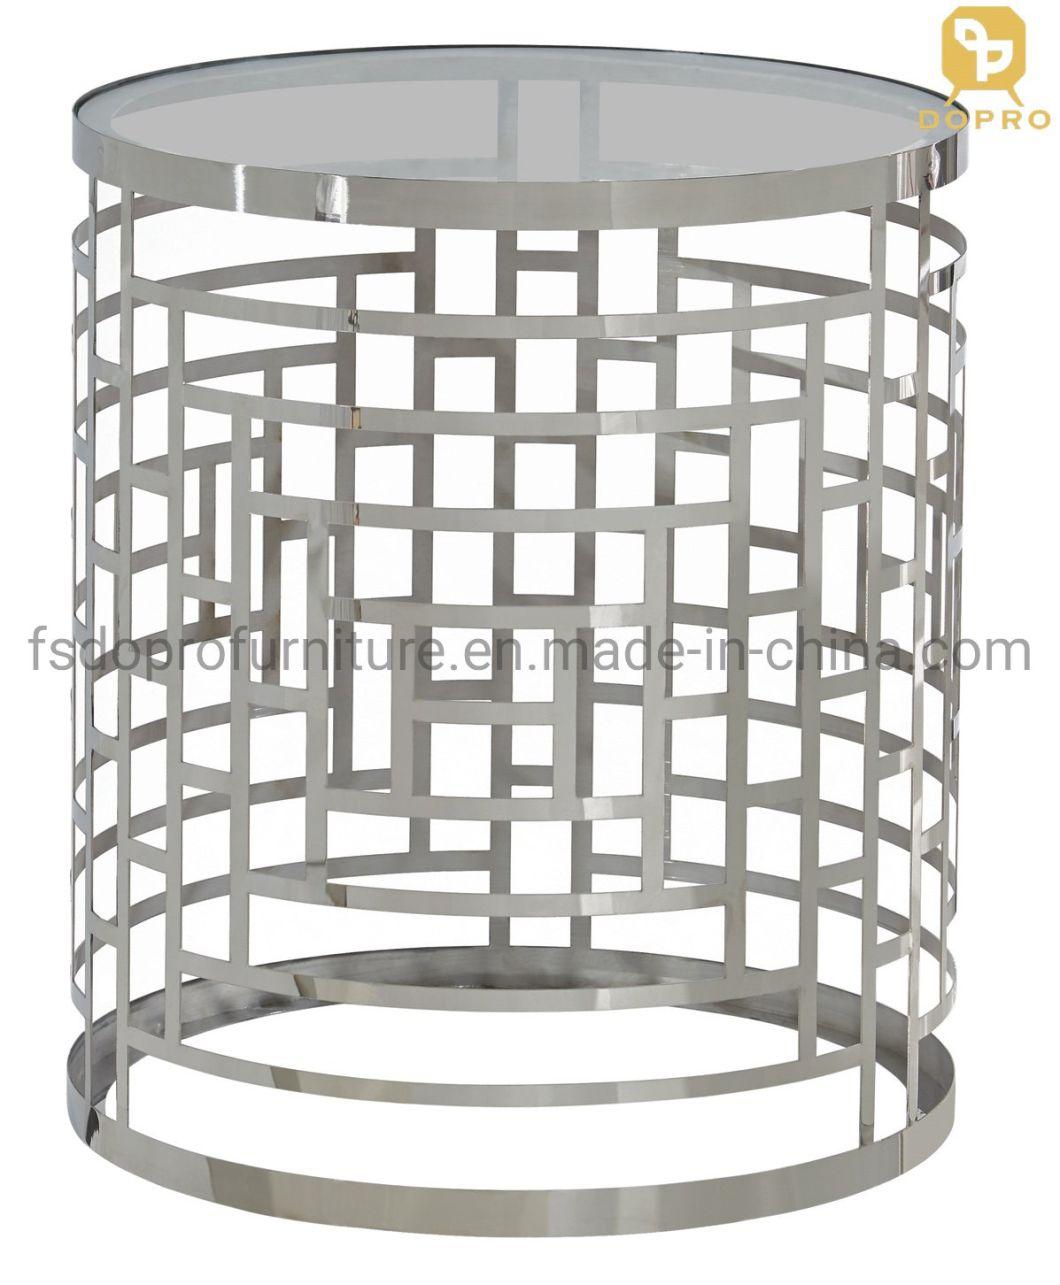 Glass Table Customized Laser Cutting Luxury Home Living Room Side End Table-Fa13